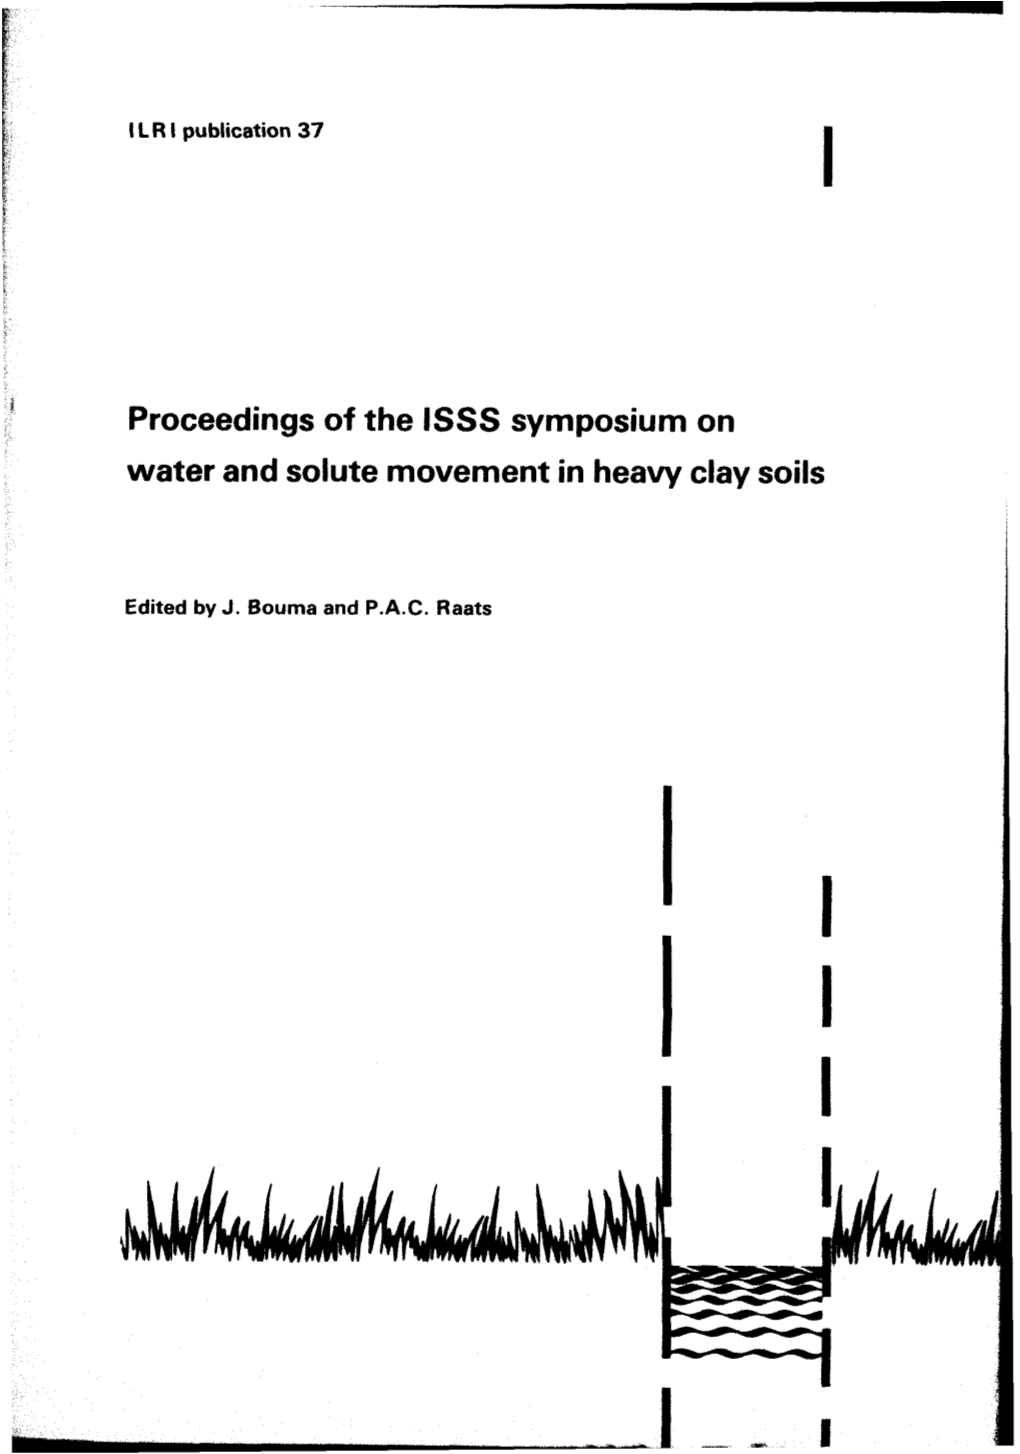 Proceedings of the ISSS Symposium on Water and Solute Movement in Heavy Clay Soils